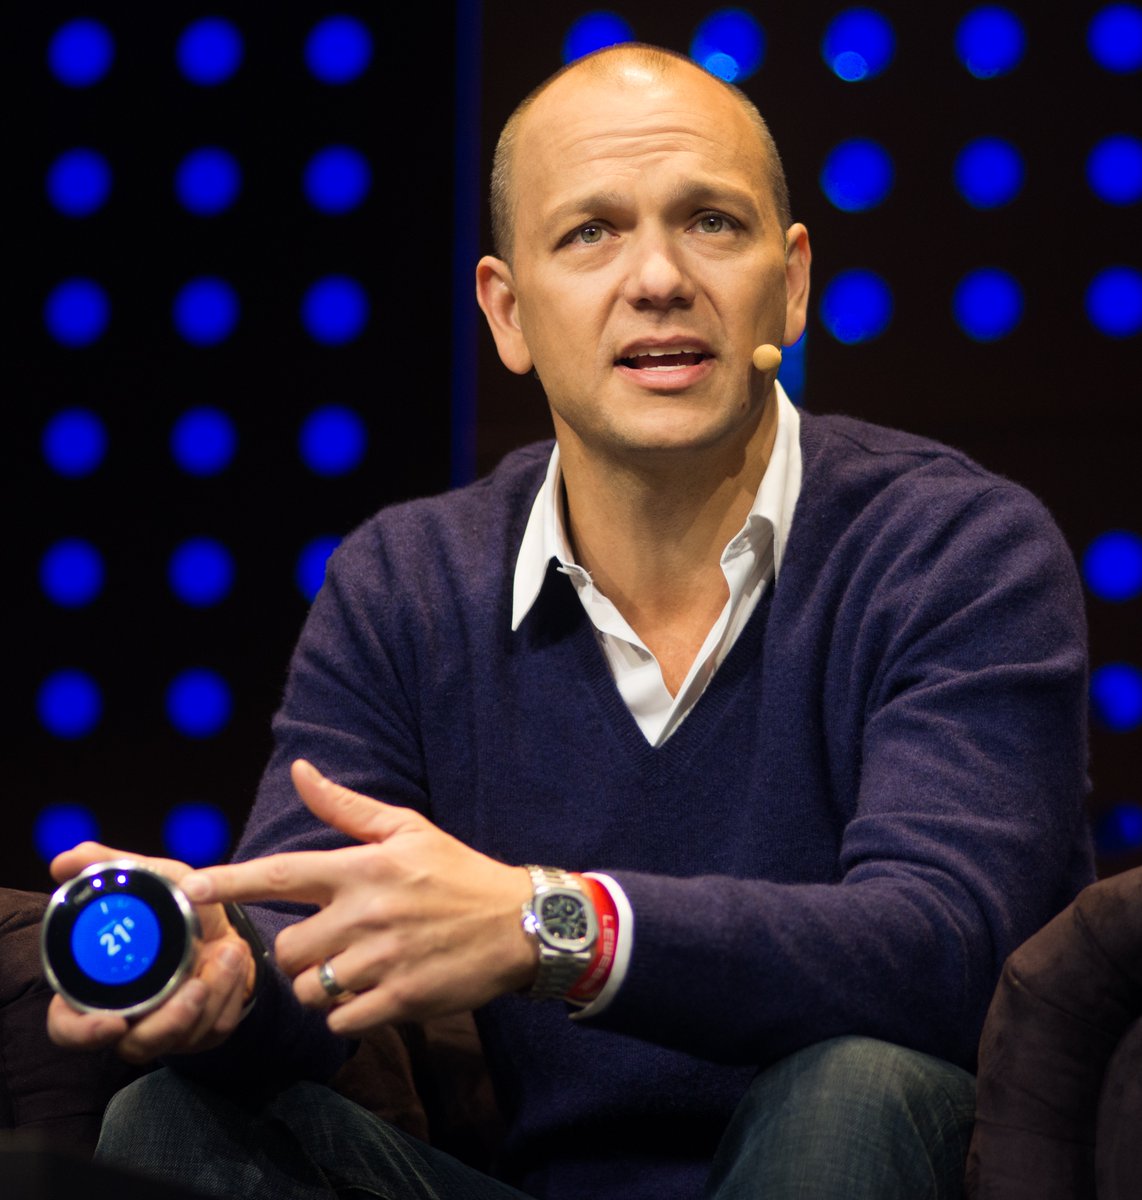 19 years ago to this date, Steve Jobs introduced the iPod, promising '1000 songs in your pocket'But the 'Father of the iPod' is someone who later co-created the iPhone, founded Nest and is now Principal at Future Shape that has invested in 200+ start-ups.Meet Tony Fadell1/